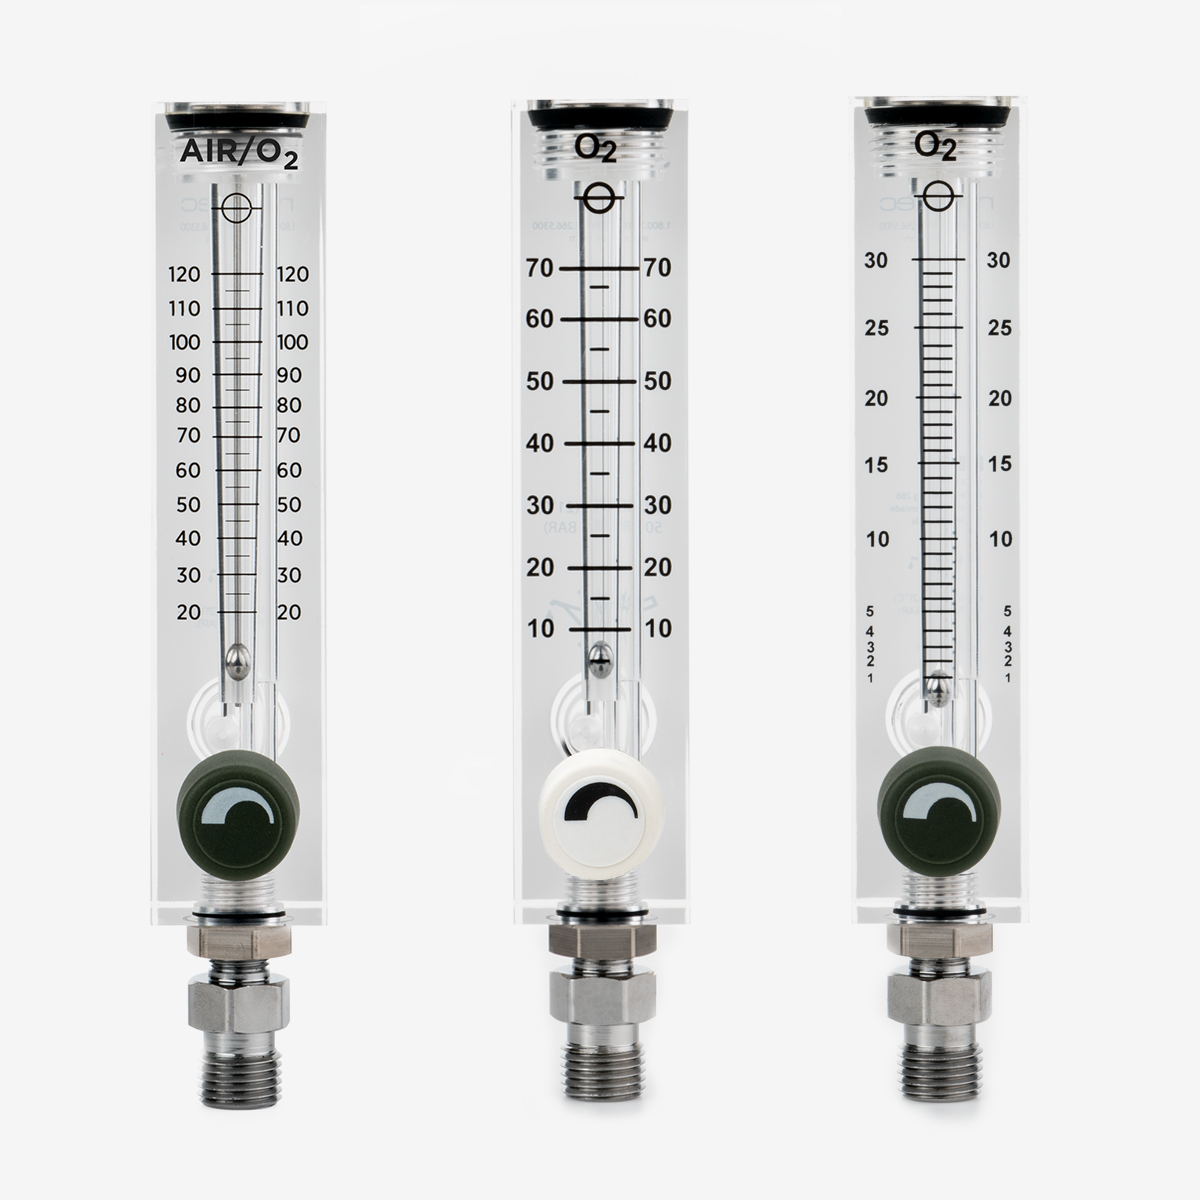 Acrylic flow meters in 0-120, 0-70, and 0-30 liters per minute with black and white knobs